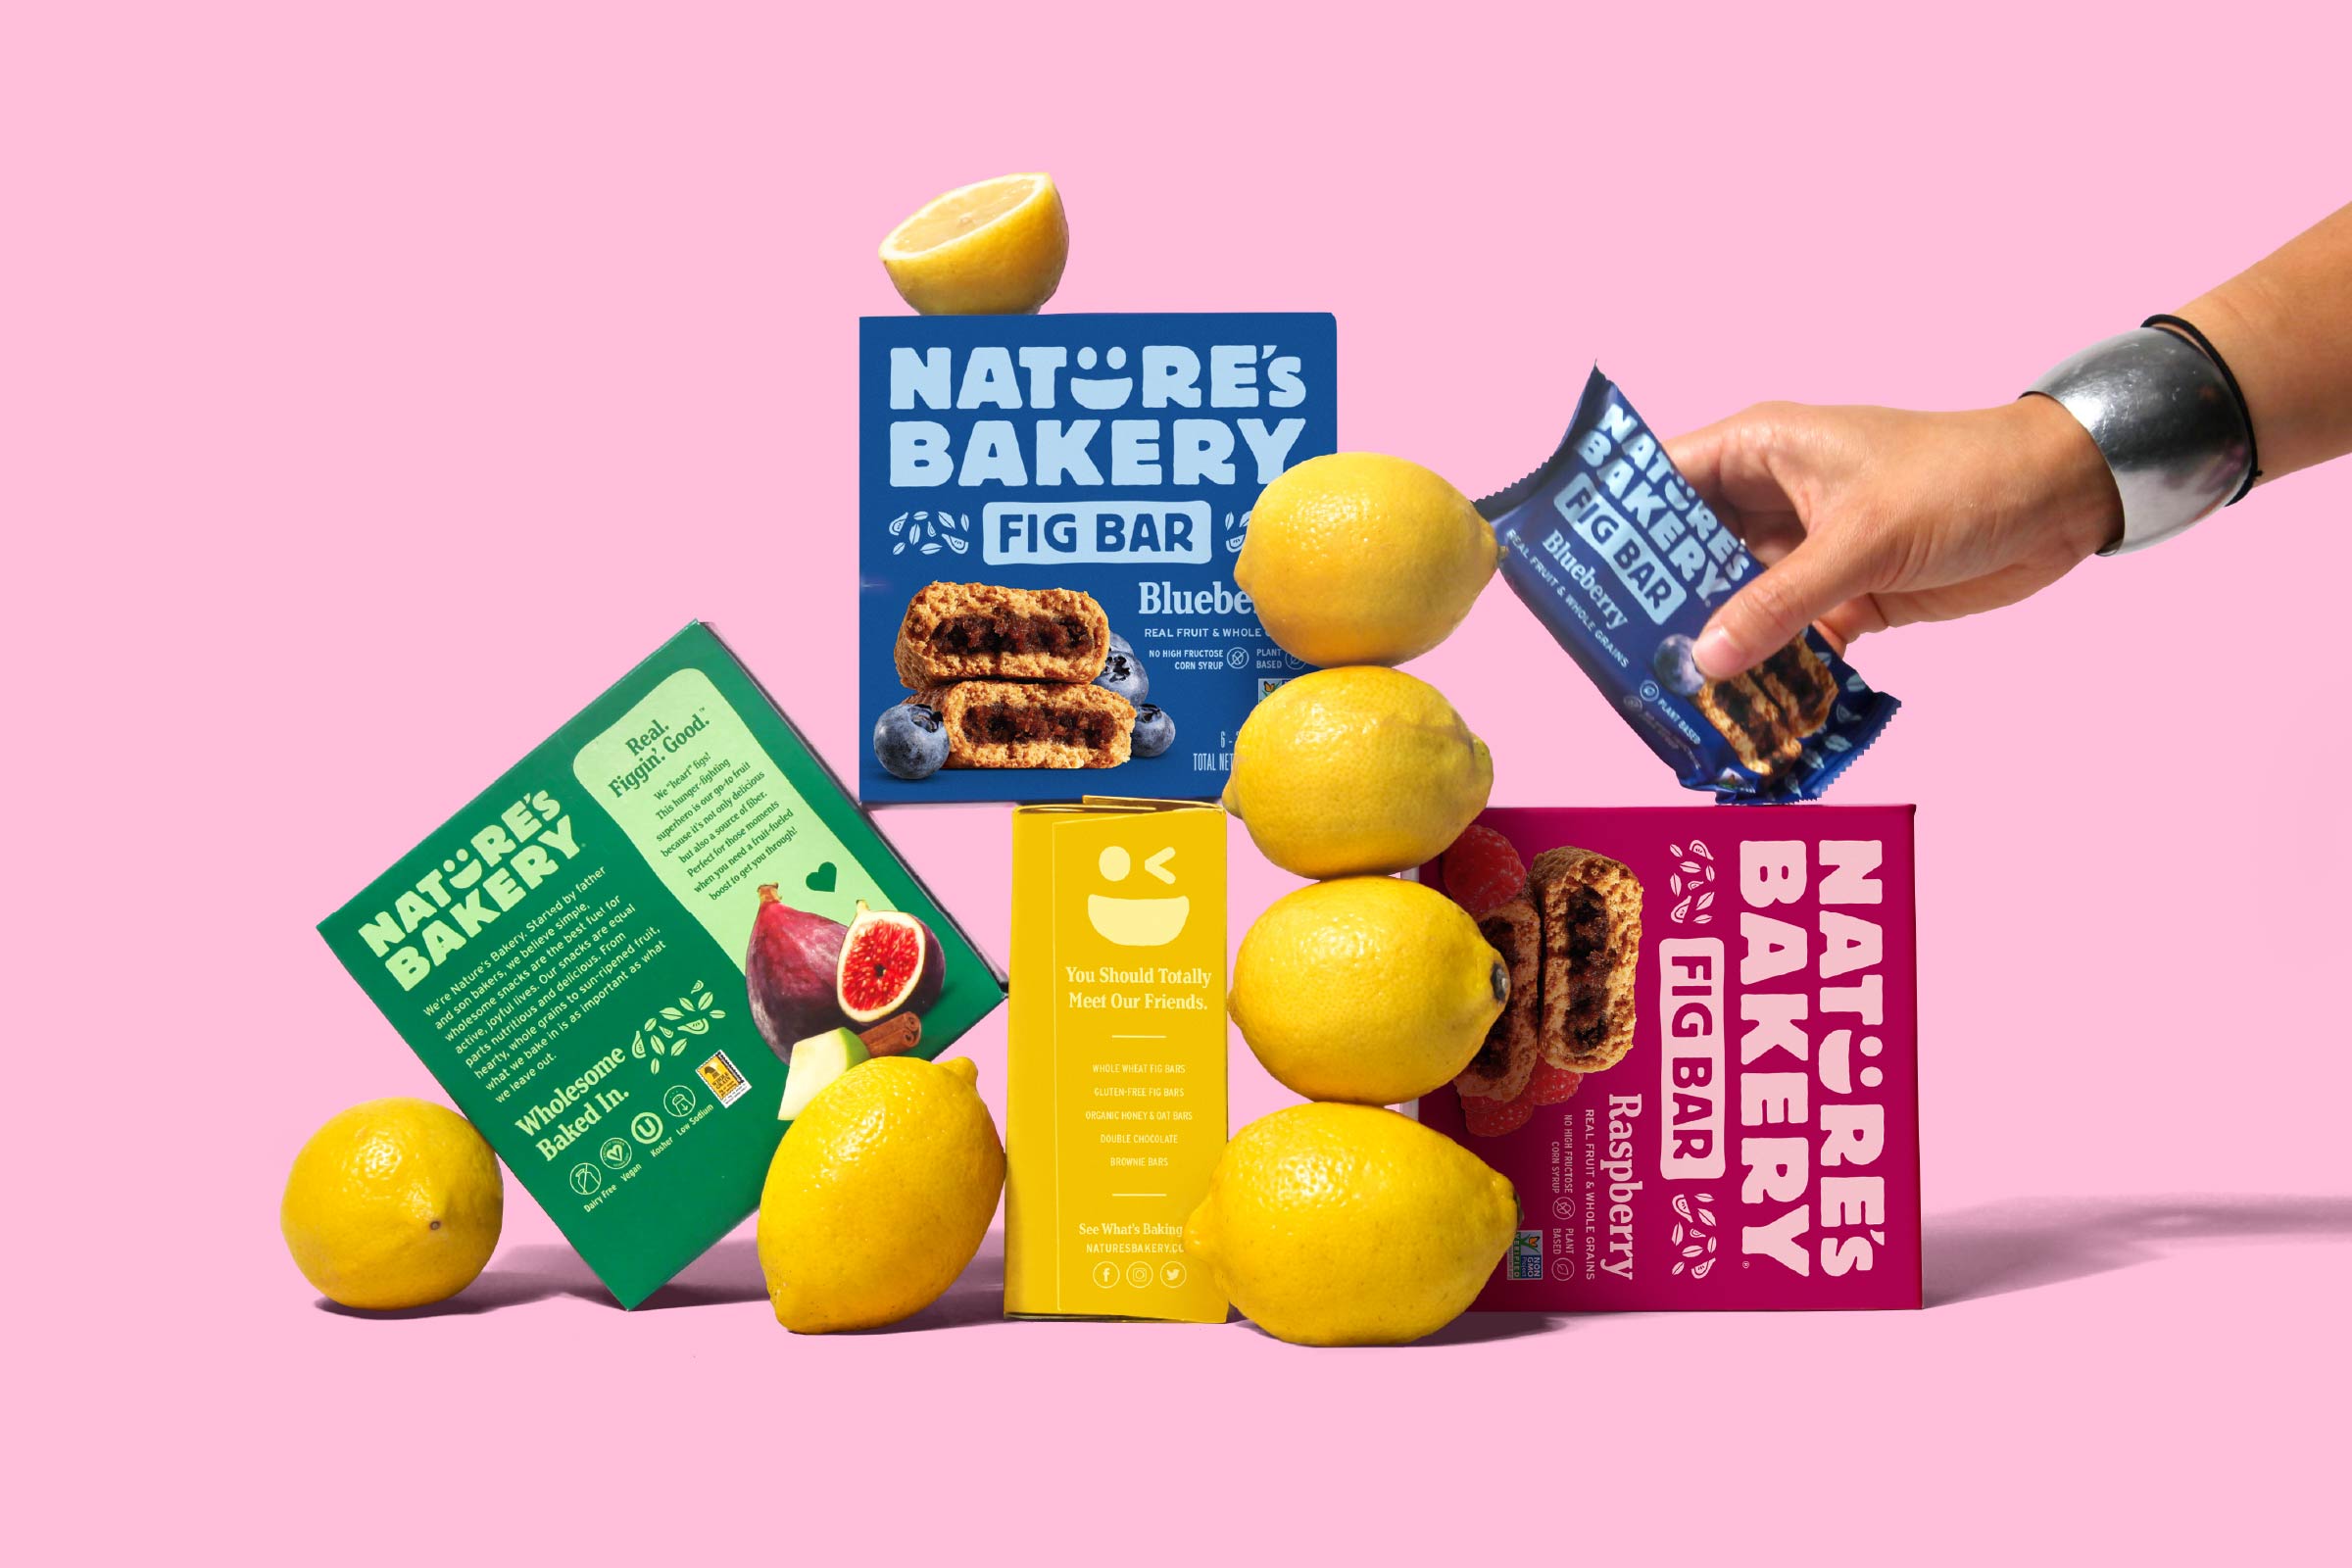 Nature's Bakery bar packaging design display with hand and lemons